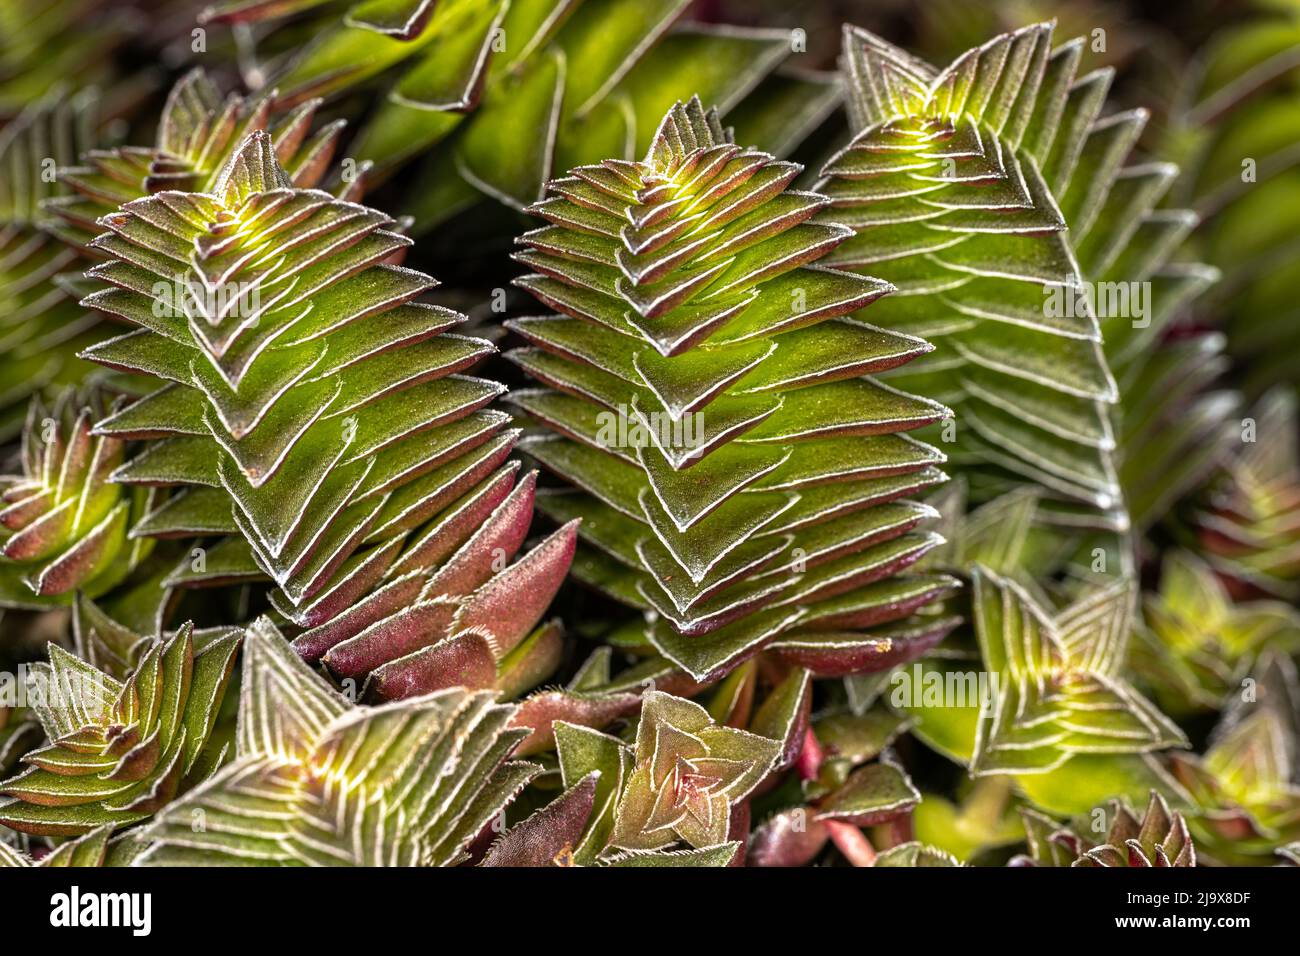 Leaves of the Red Flames, Red Pagoda or Campfire Plant (Crassula capitella) Stock Photo